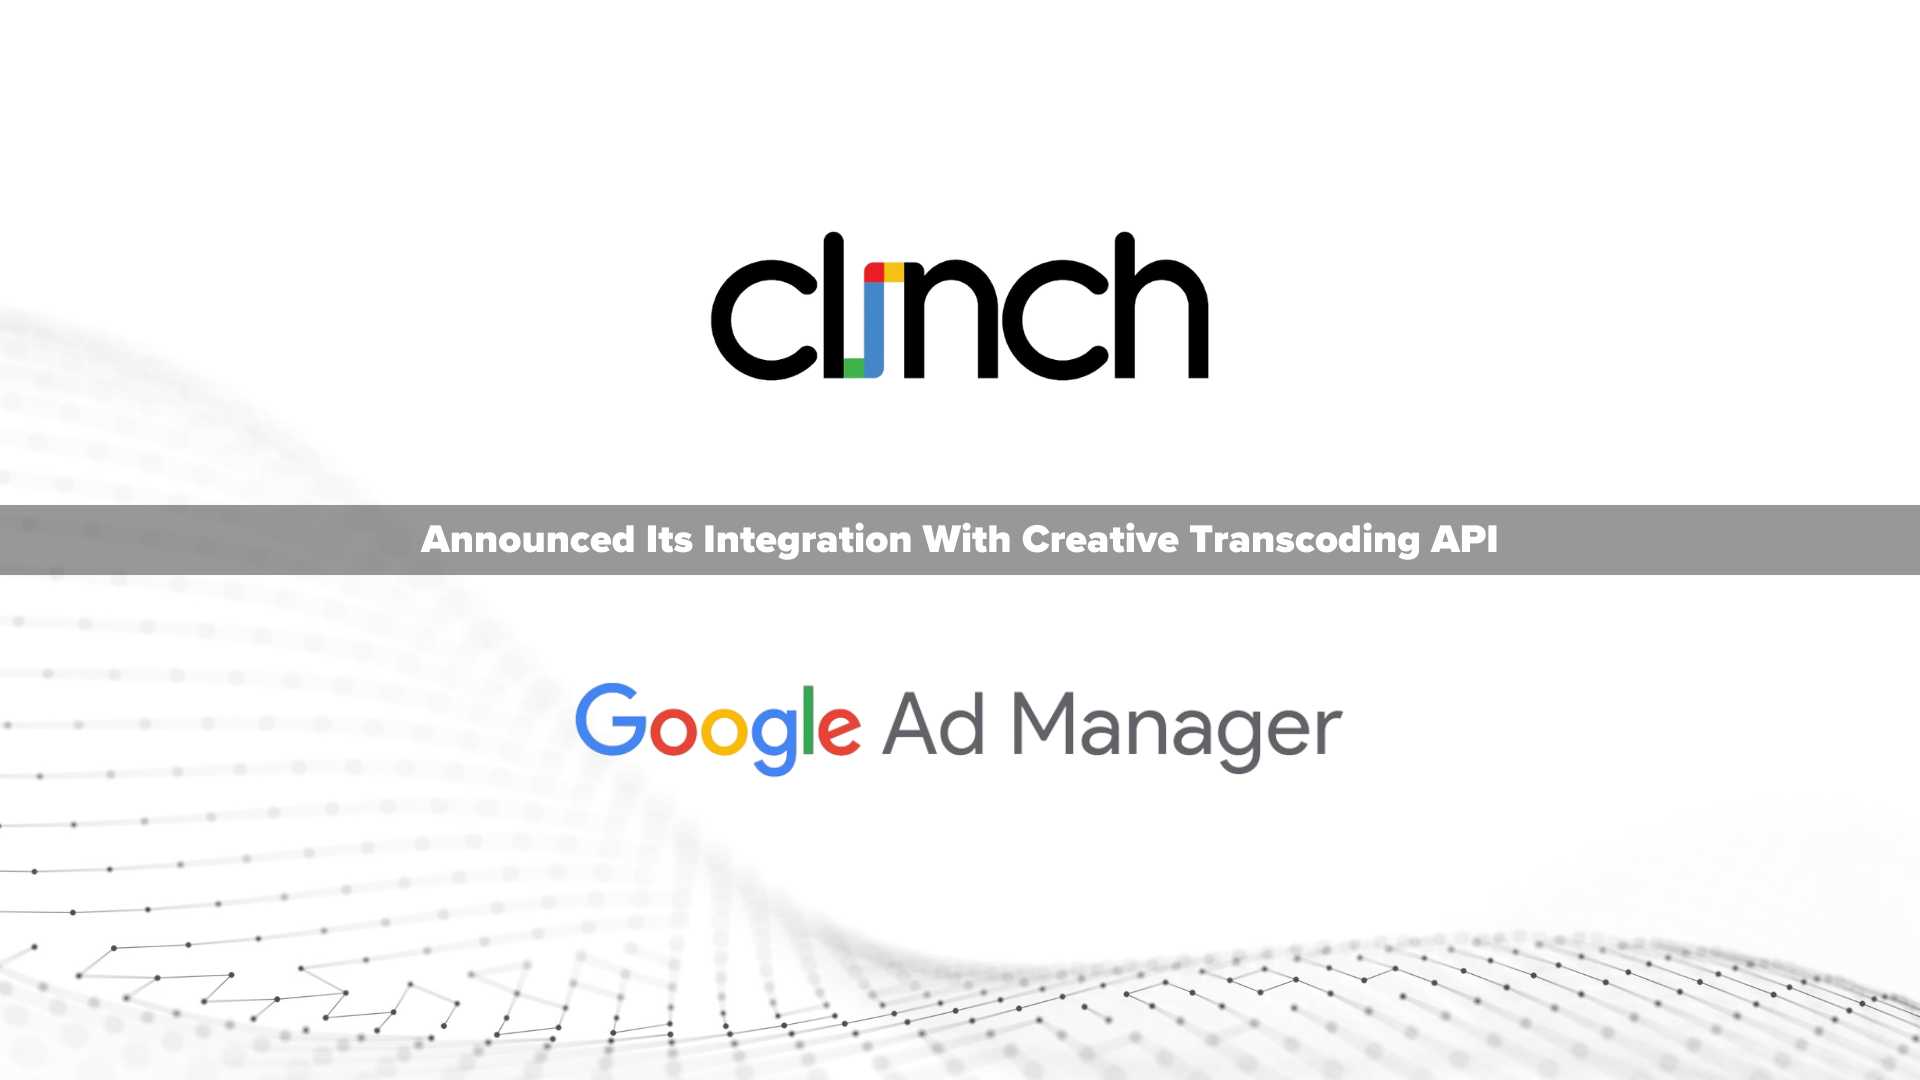 Clinch Announces Integration with Google Ad Manager's Creative Transcoding API